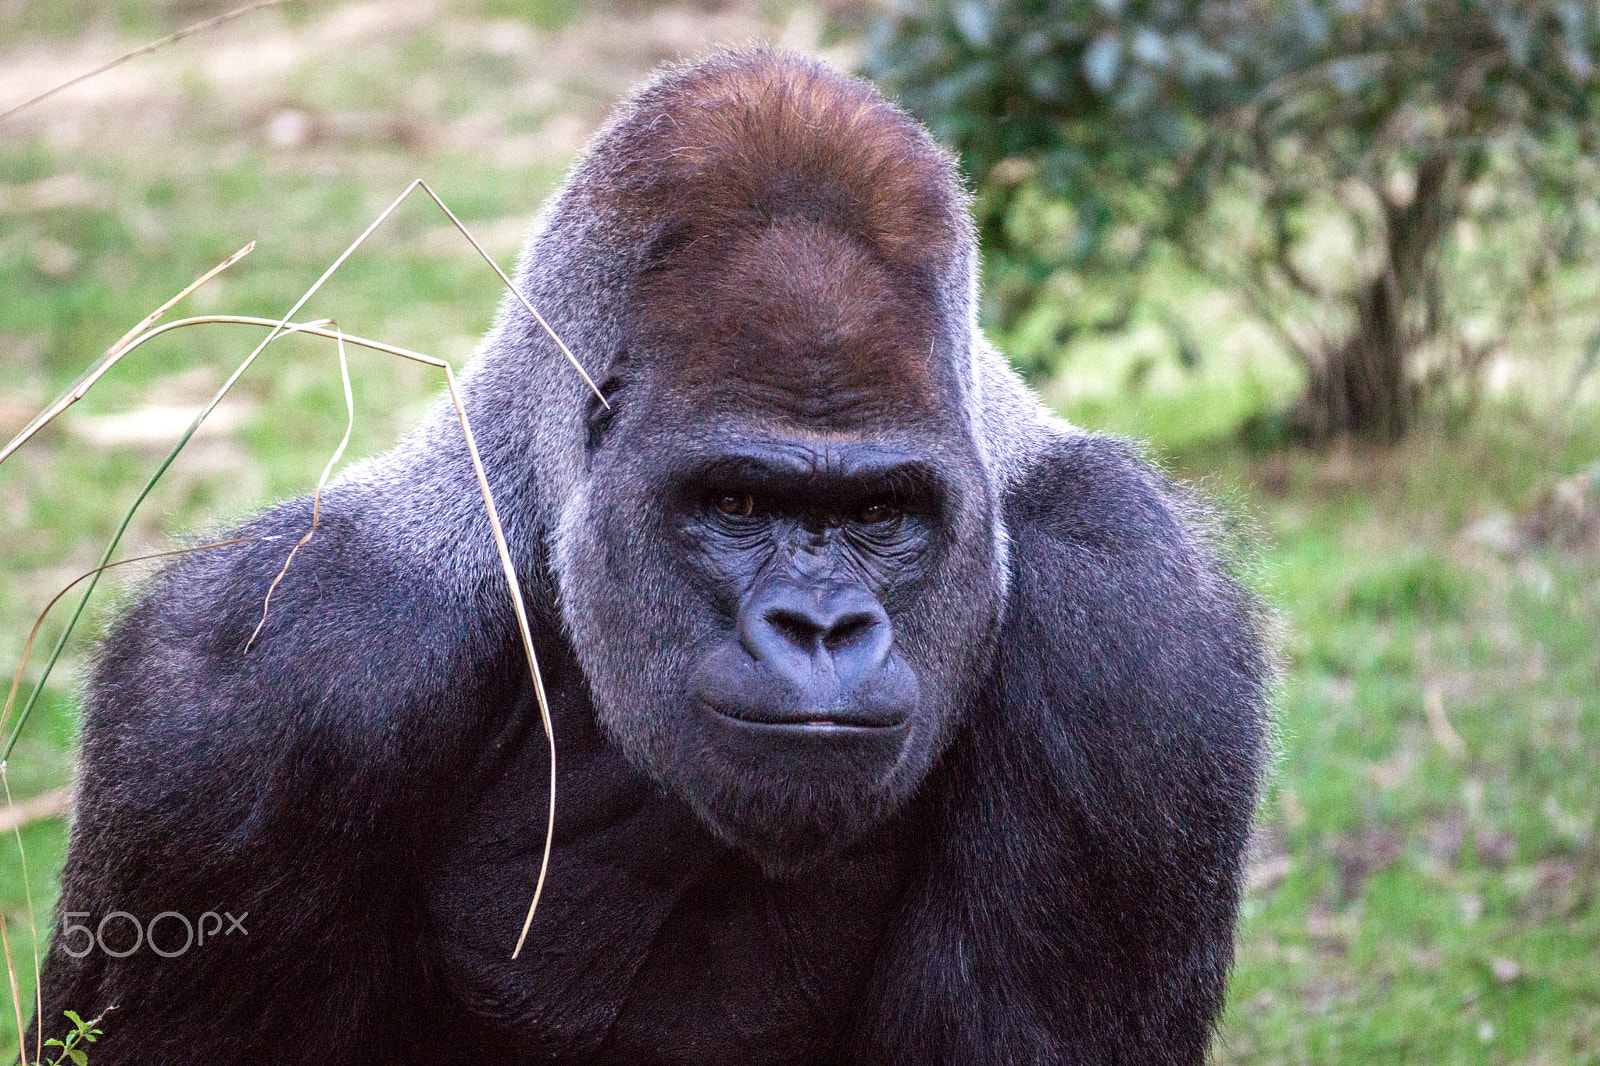 Sony SLT-A77 sample photo. A close-up of a gorilla in his habitat photography